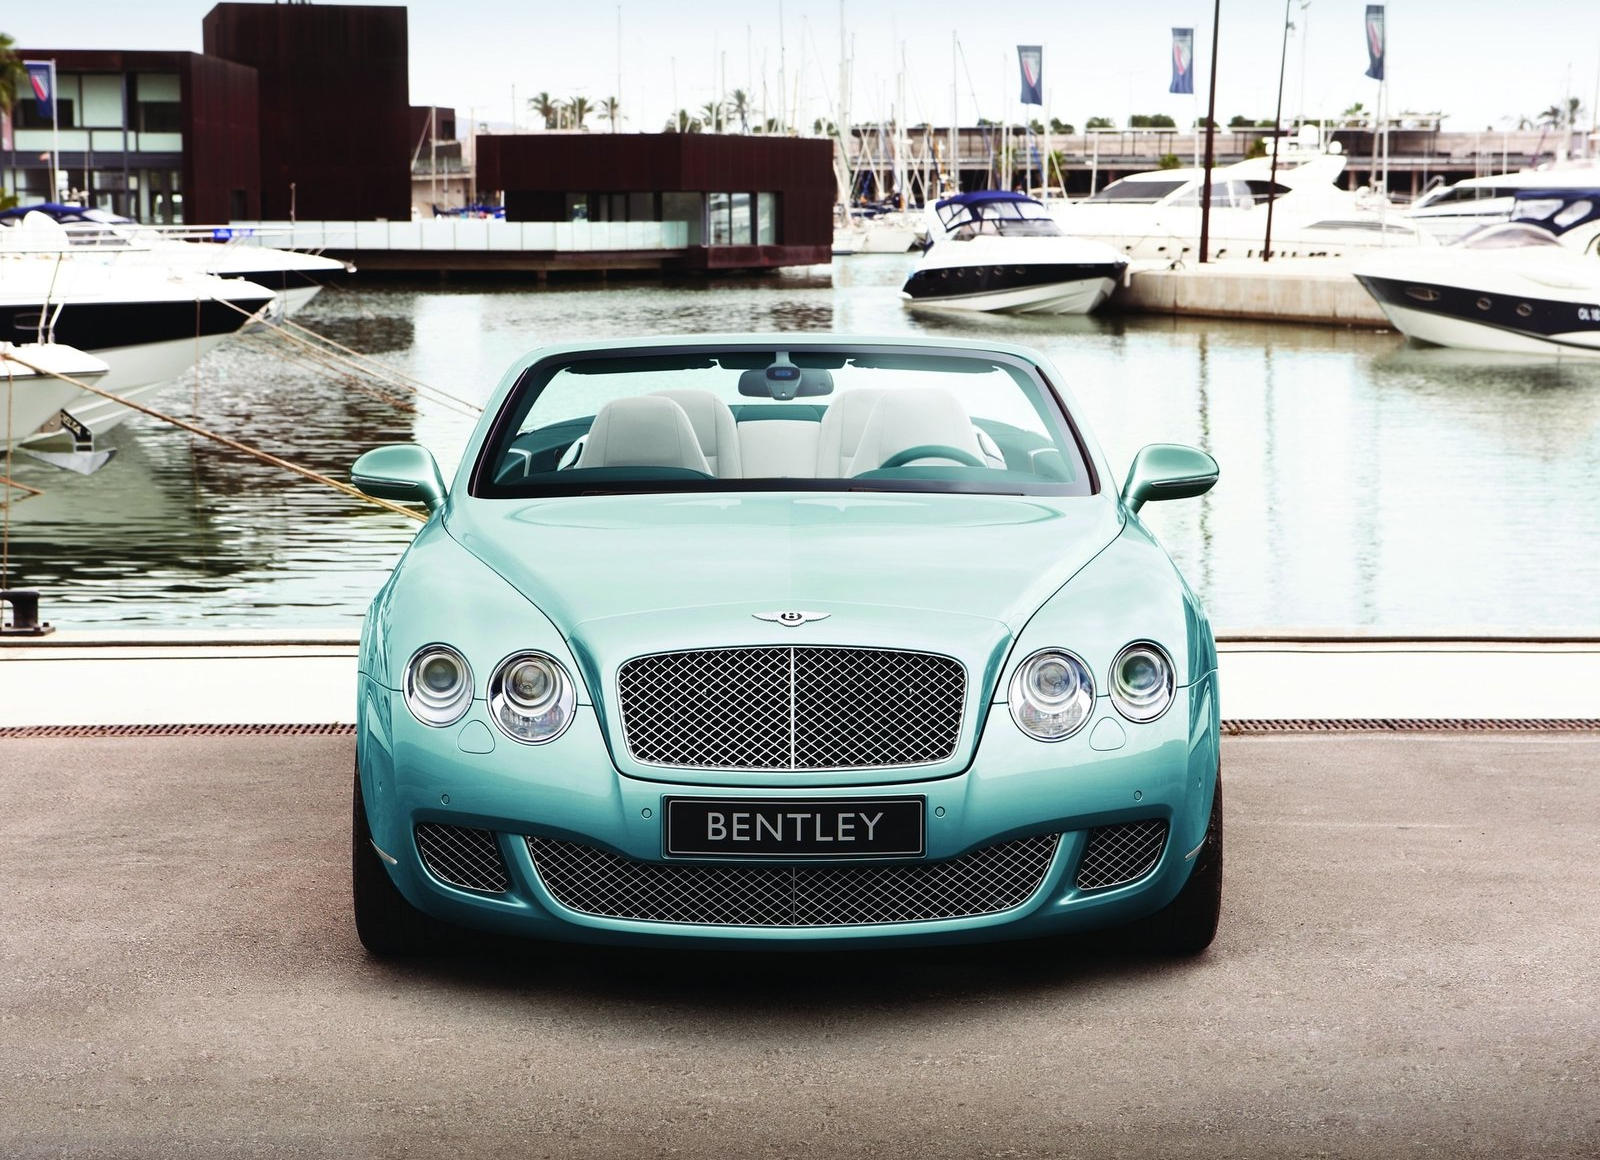 2010 Bentley Continental GT Convertible Front View